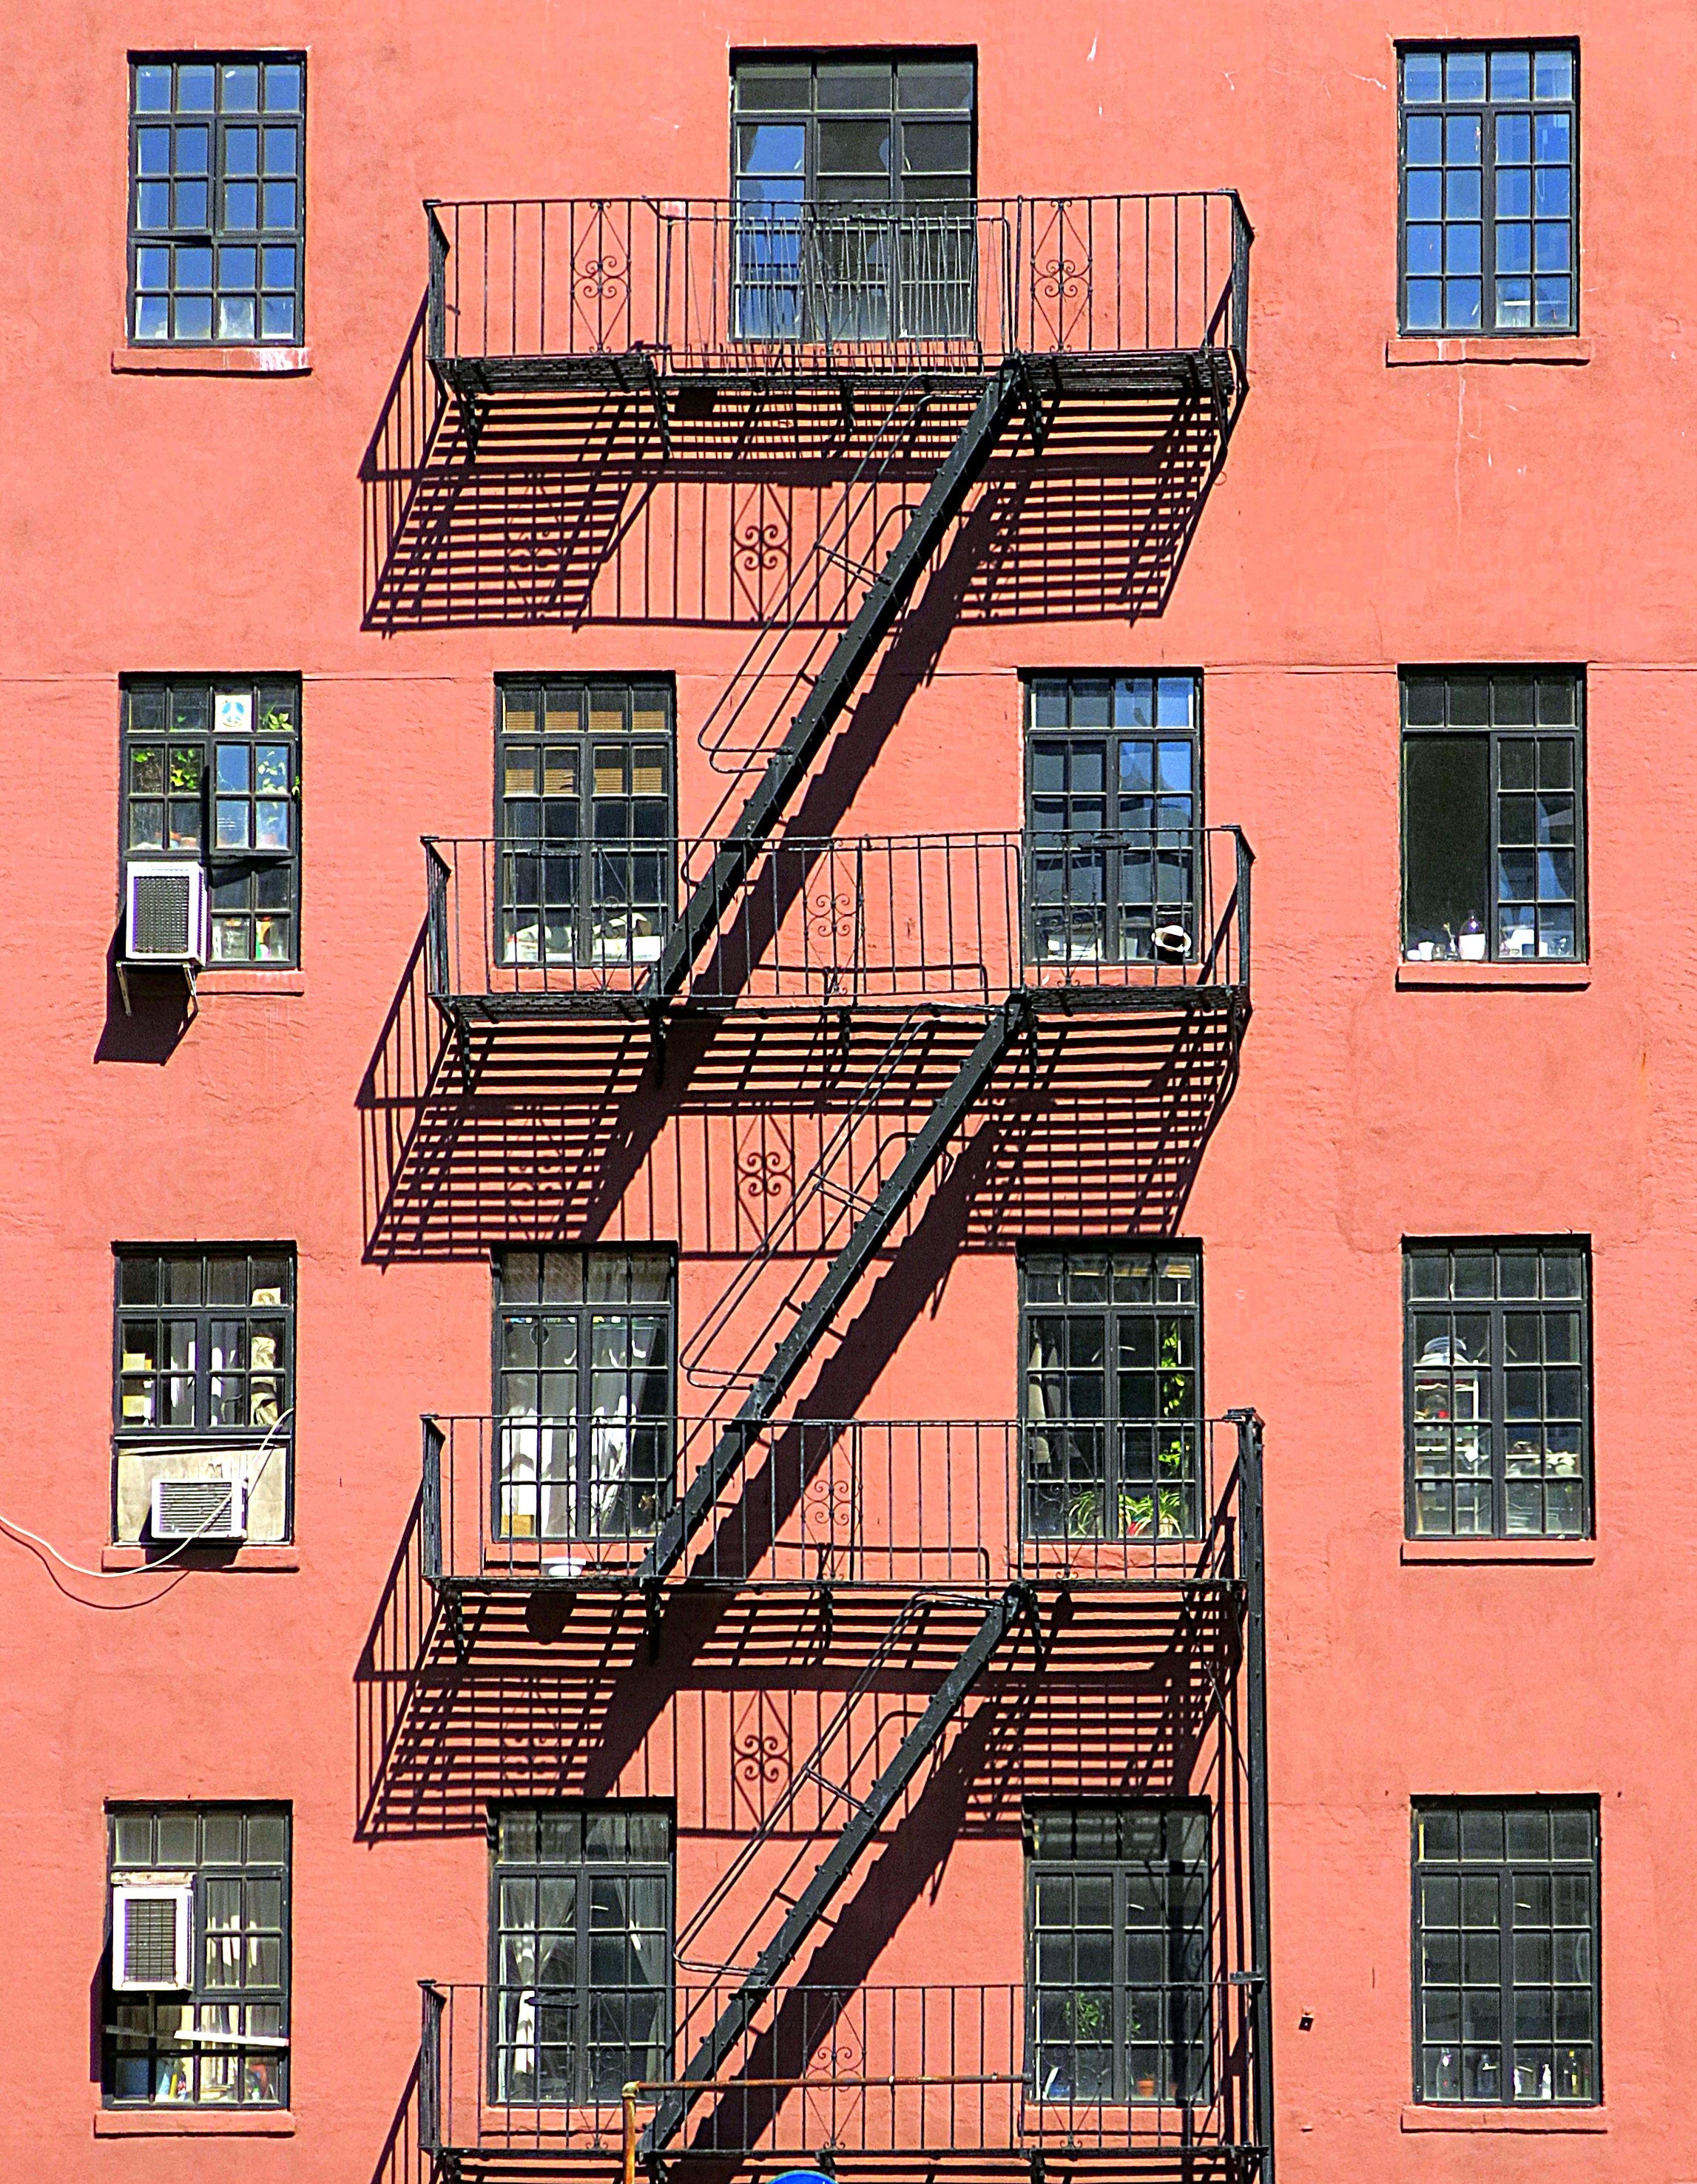 An image of a fire escape on the side of a brick building